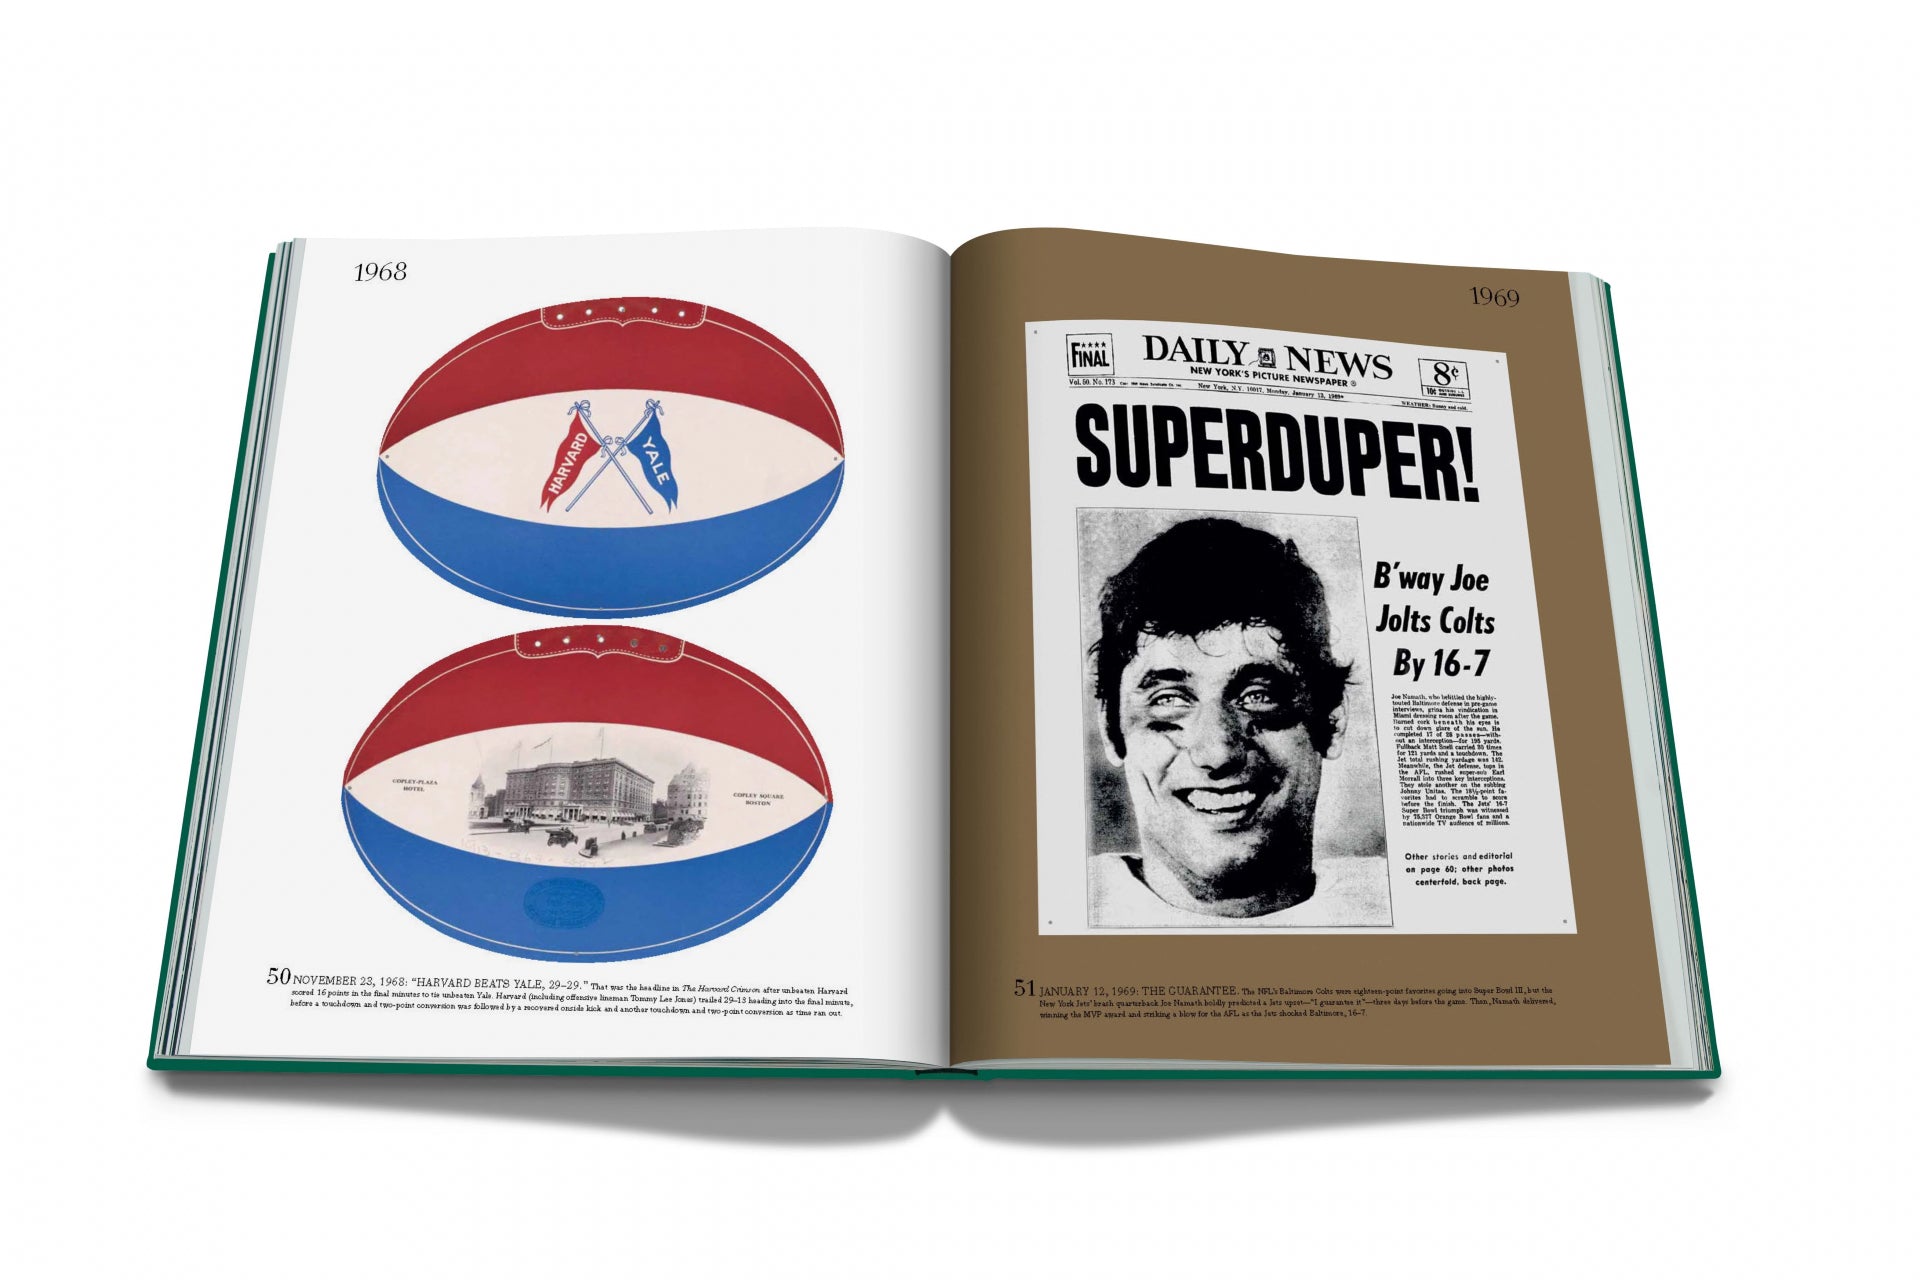 ASSOULINE Football: The Impossible Collection Book by Michael MacCambridge